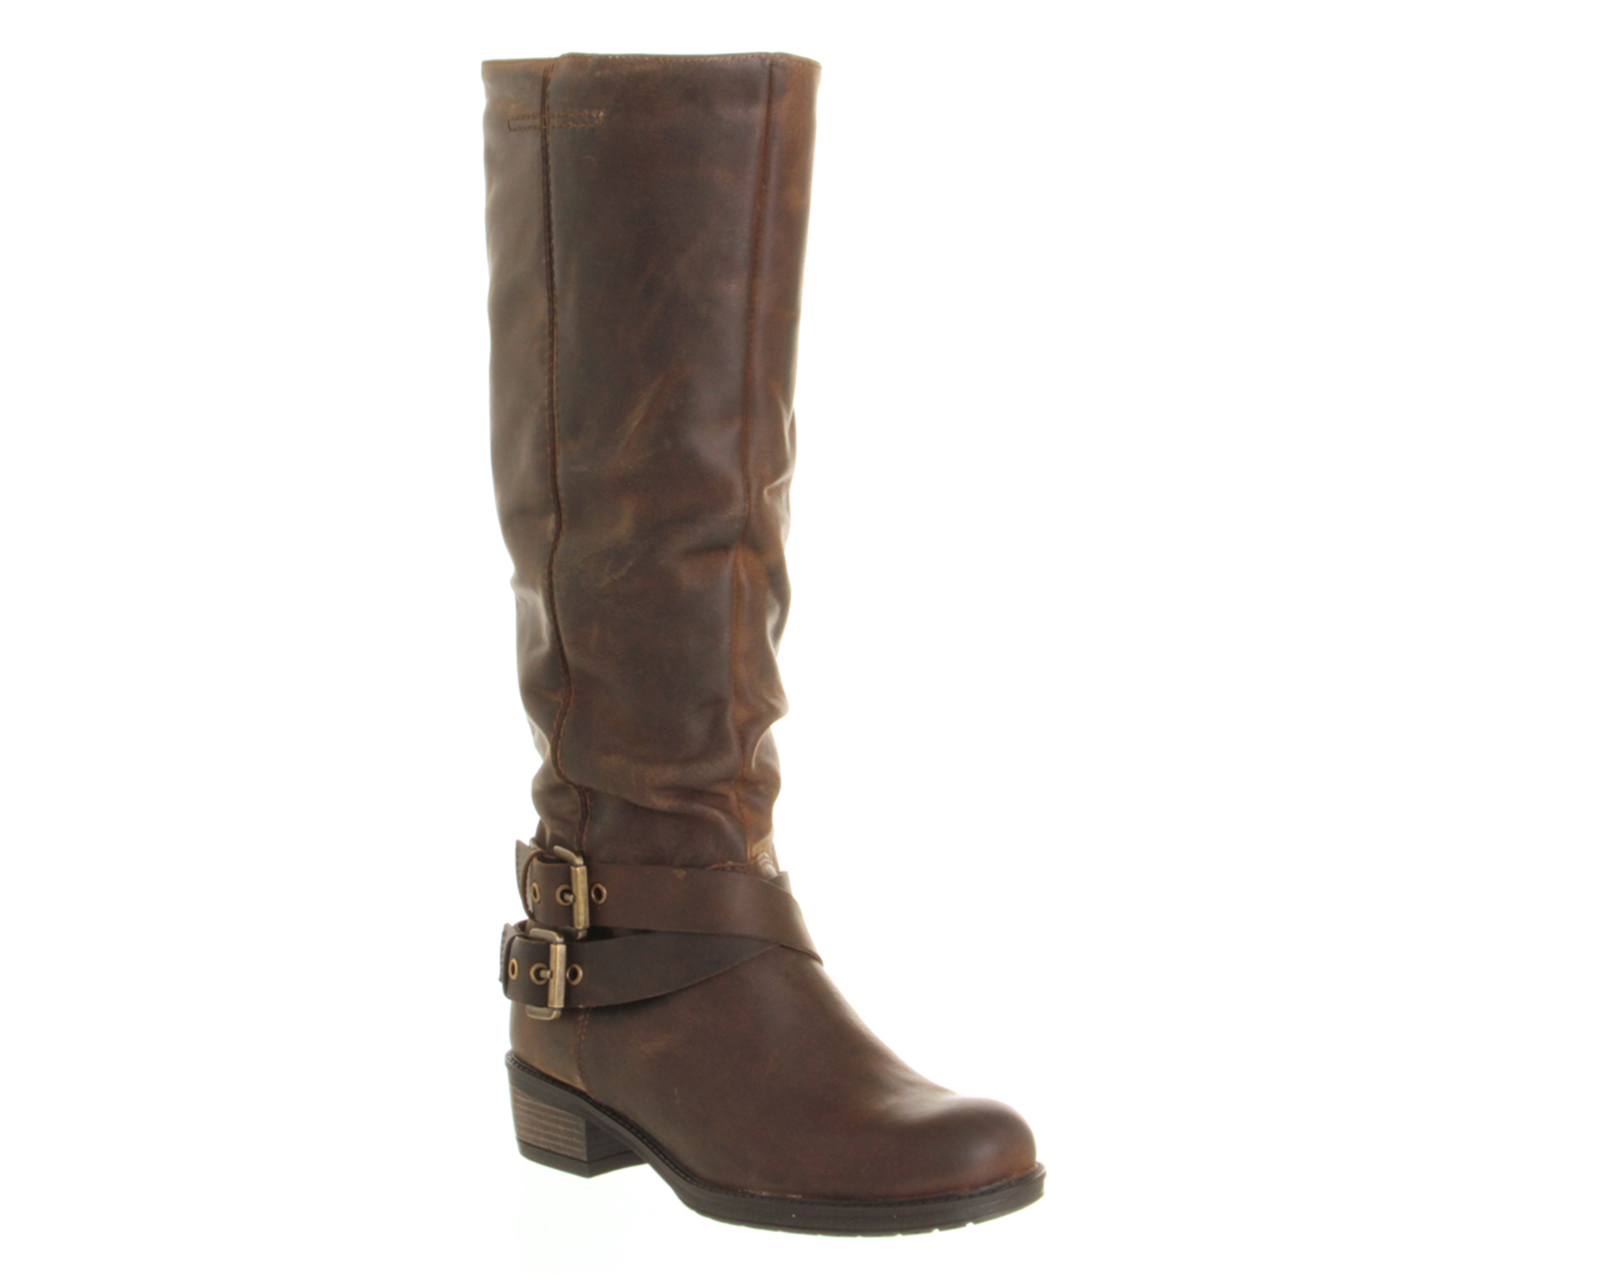 OFFICENifty Buckle Knee BootsTan Leather